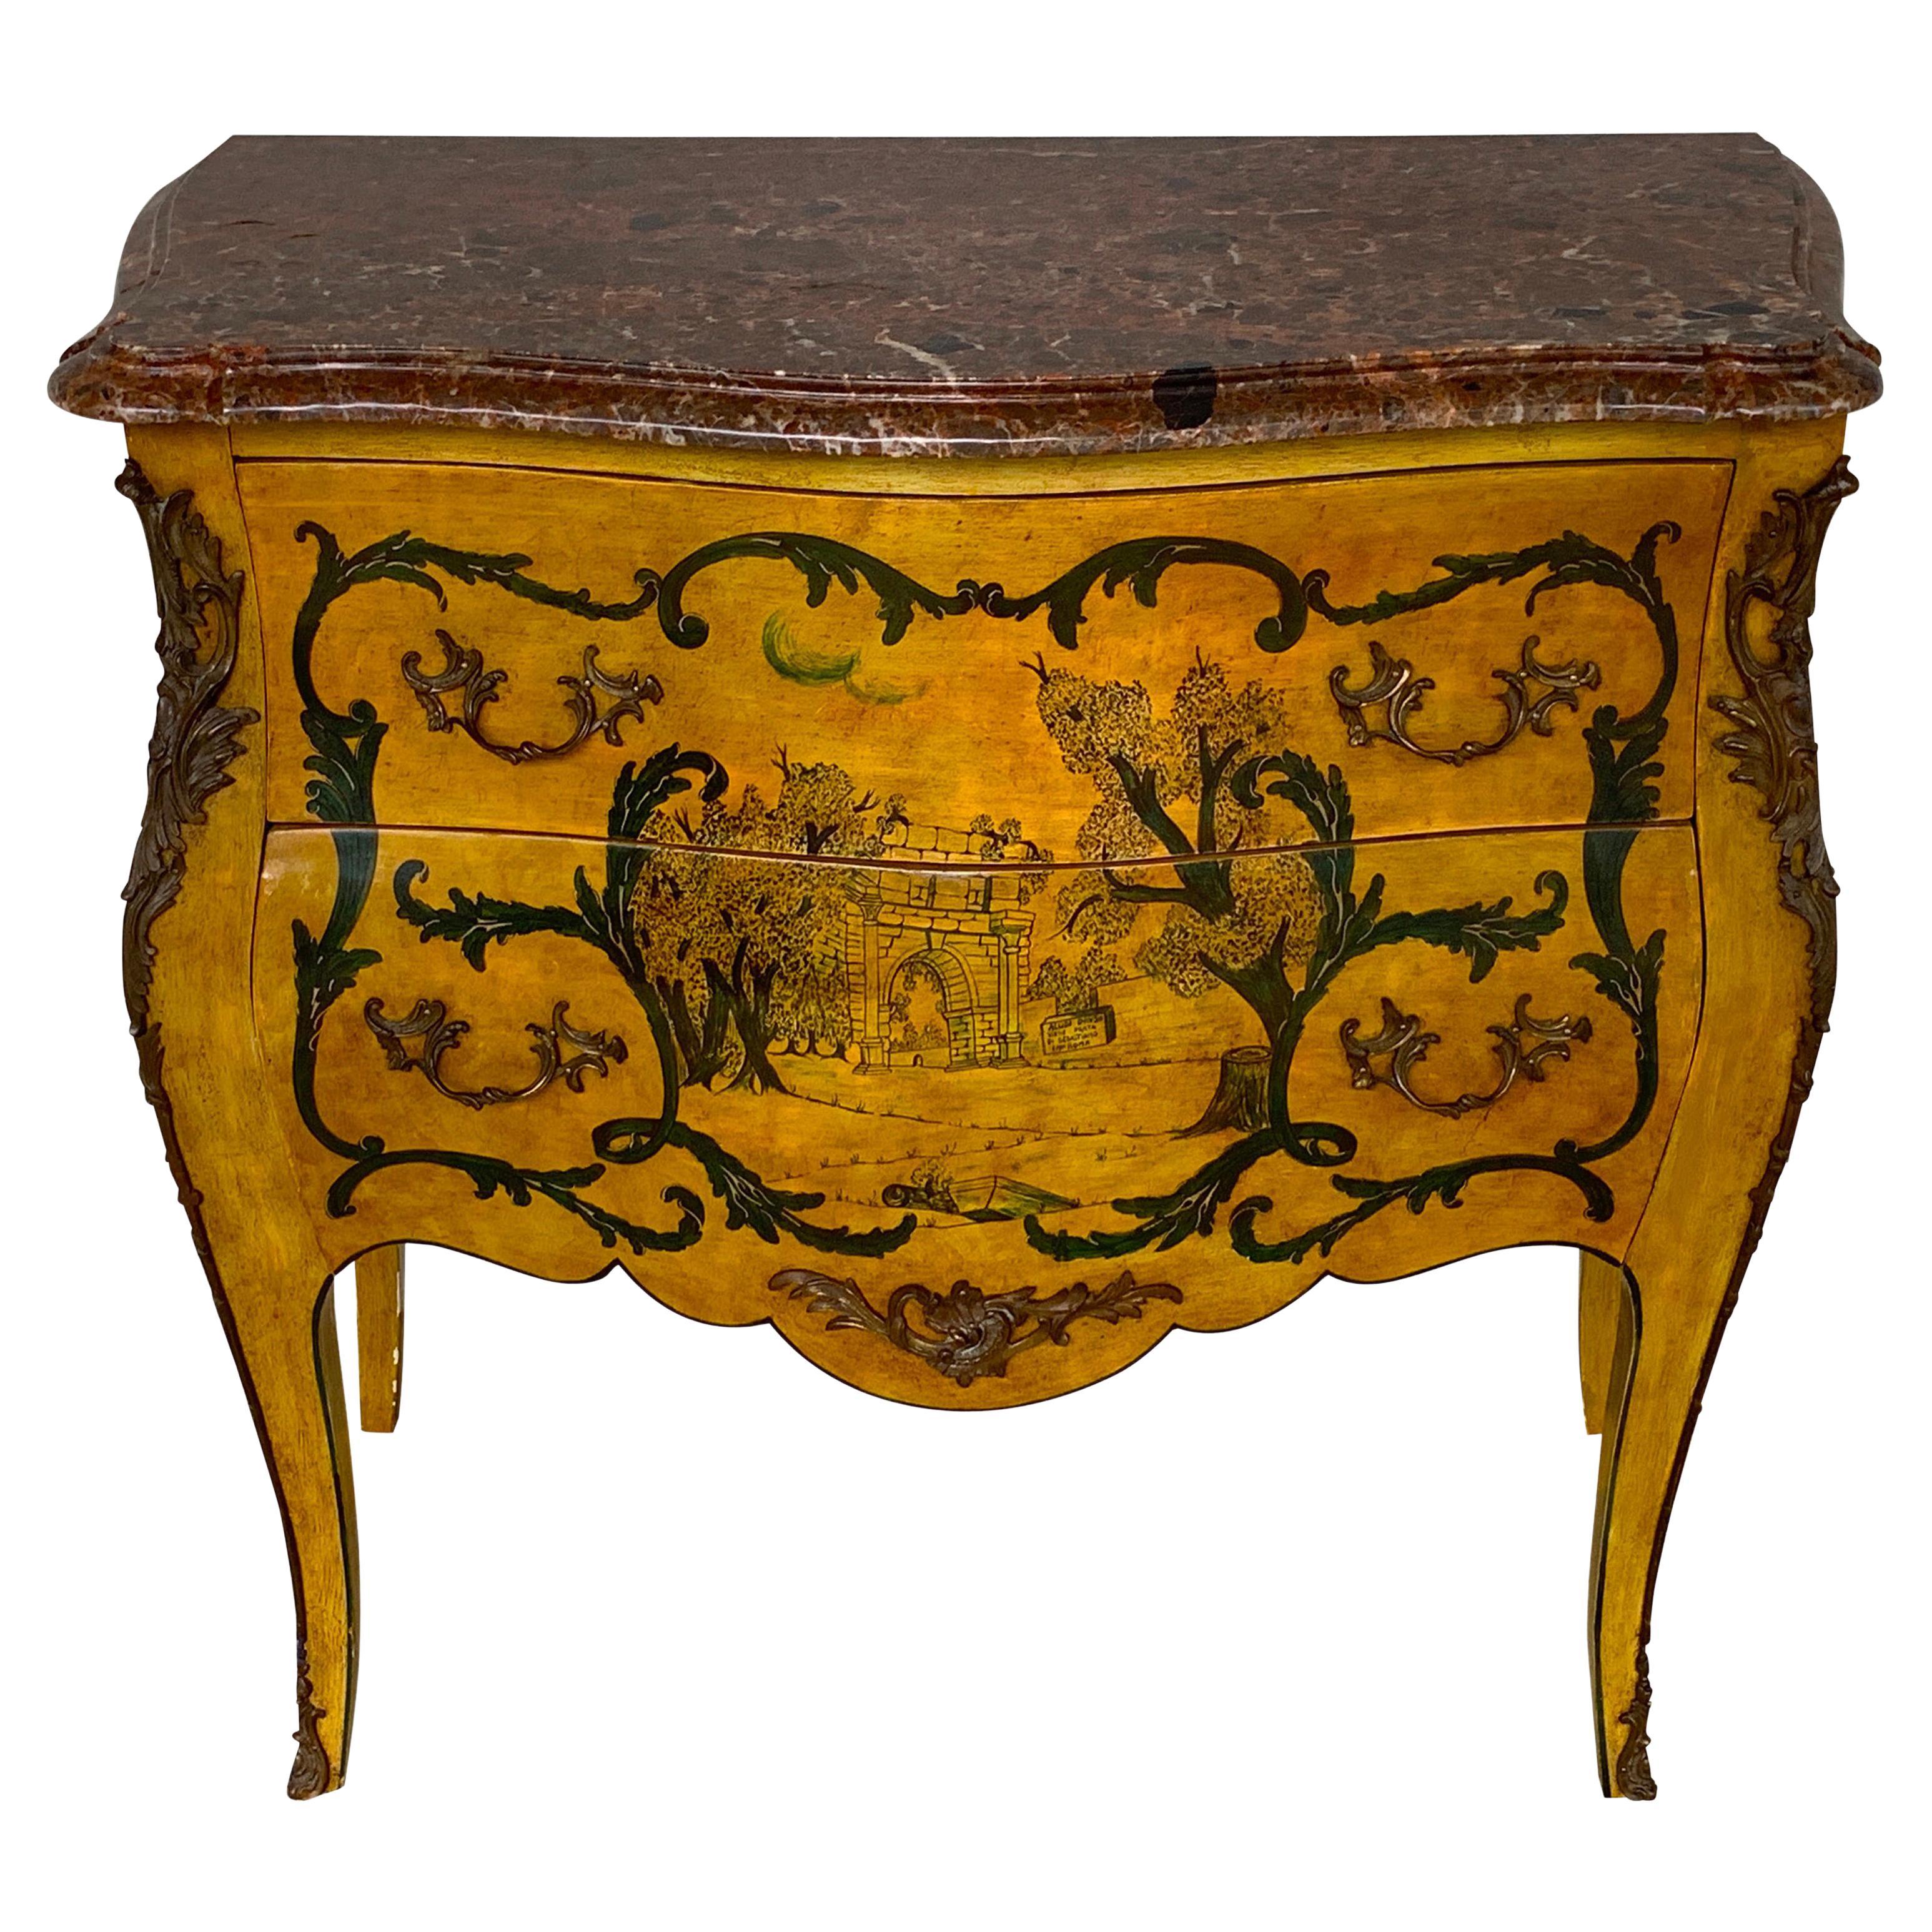 Fine Italian Piranesi Topographical Polychromed Marble Top Commode For Sale